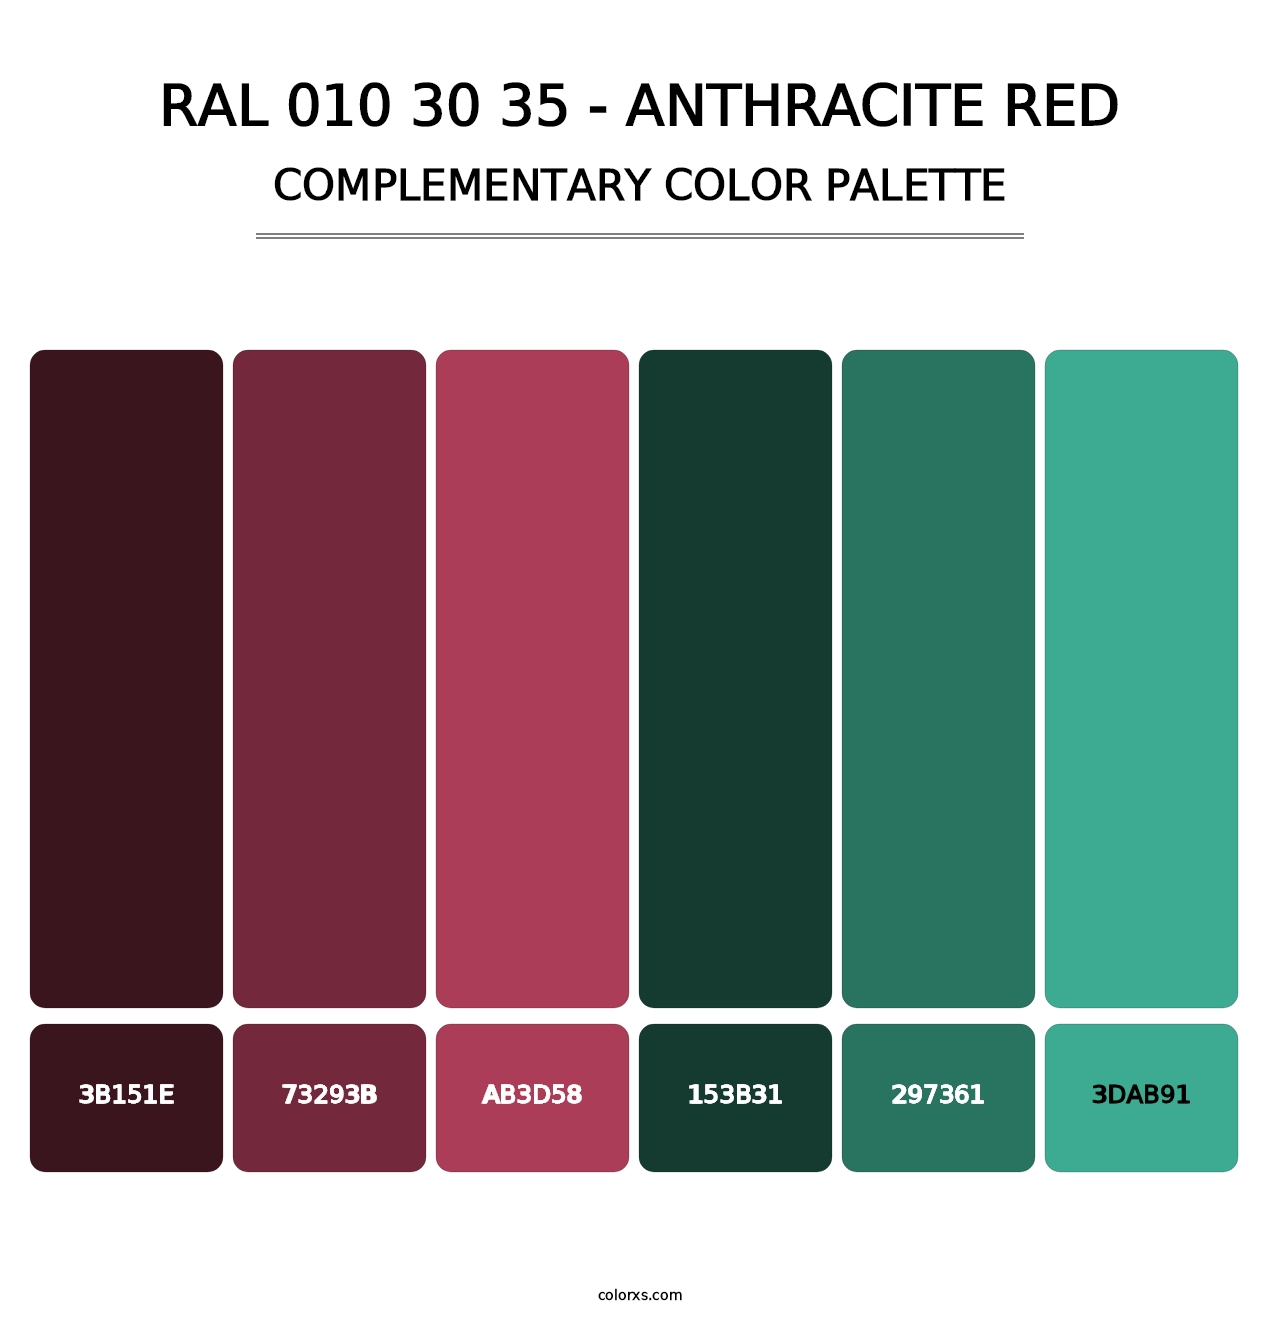 RAL 010 30 35 - Anthracite Red - Complementary Color Palette